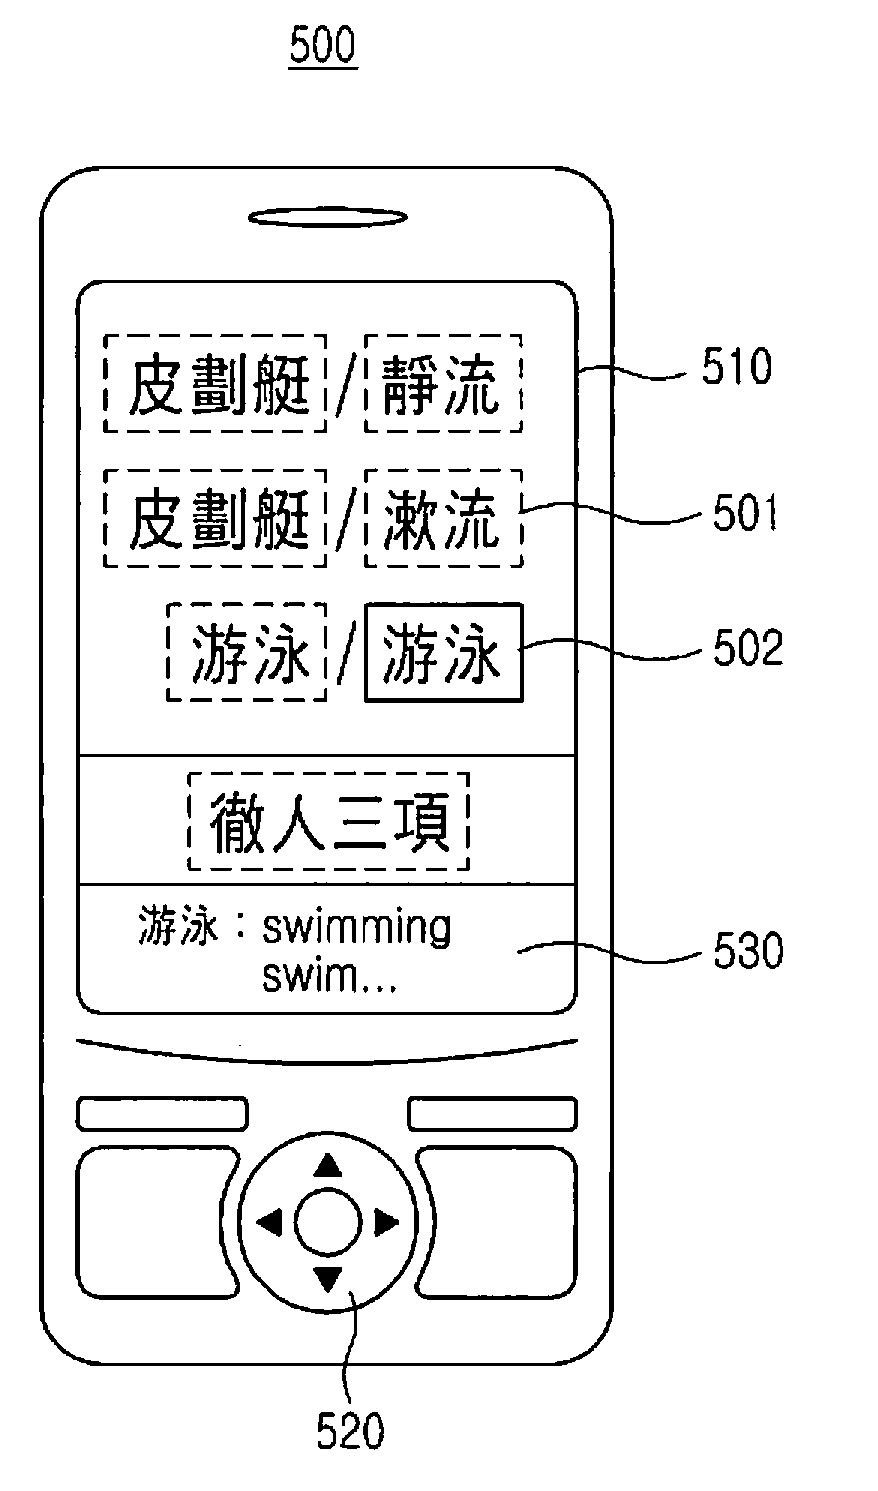 Method for recognizing and translating characters in camera-based image